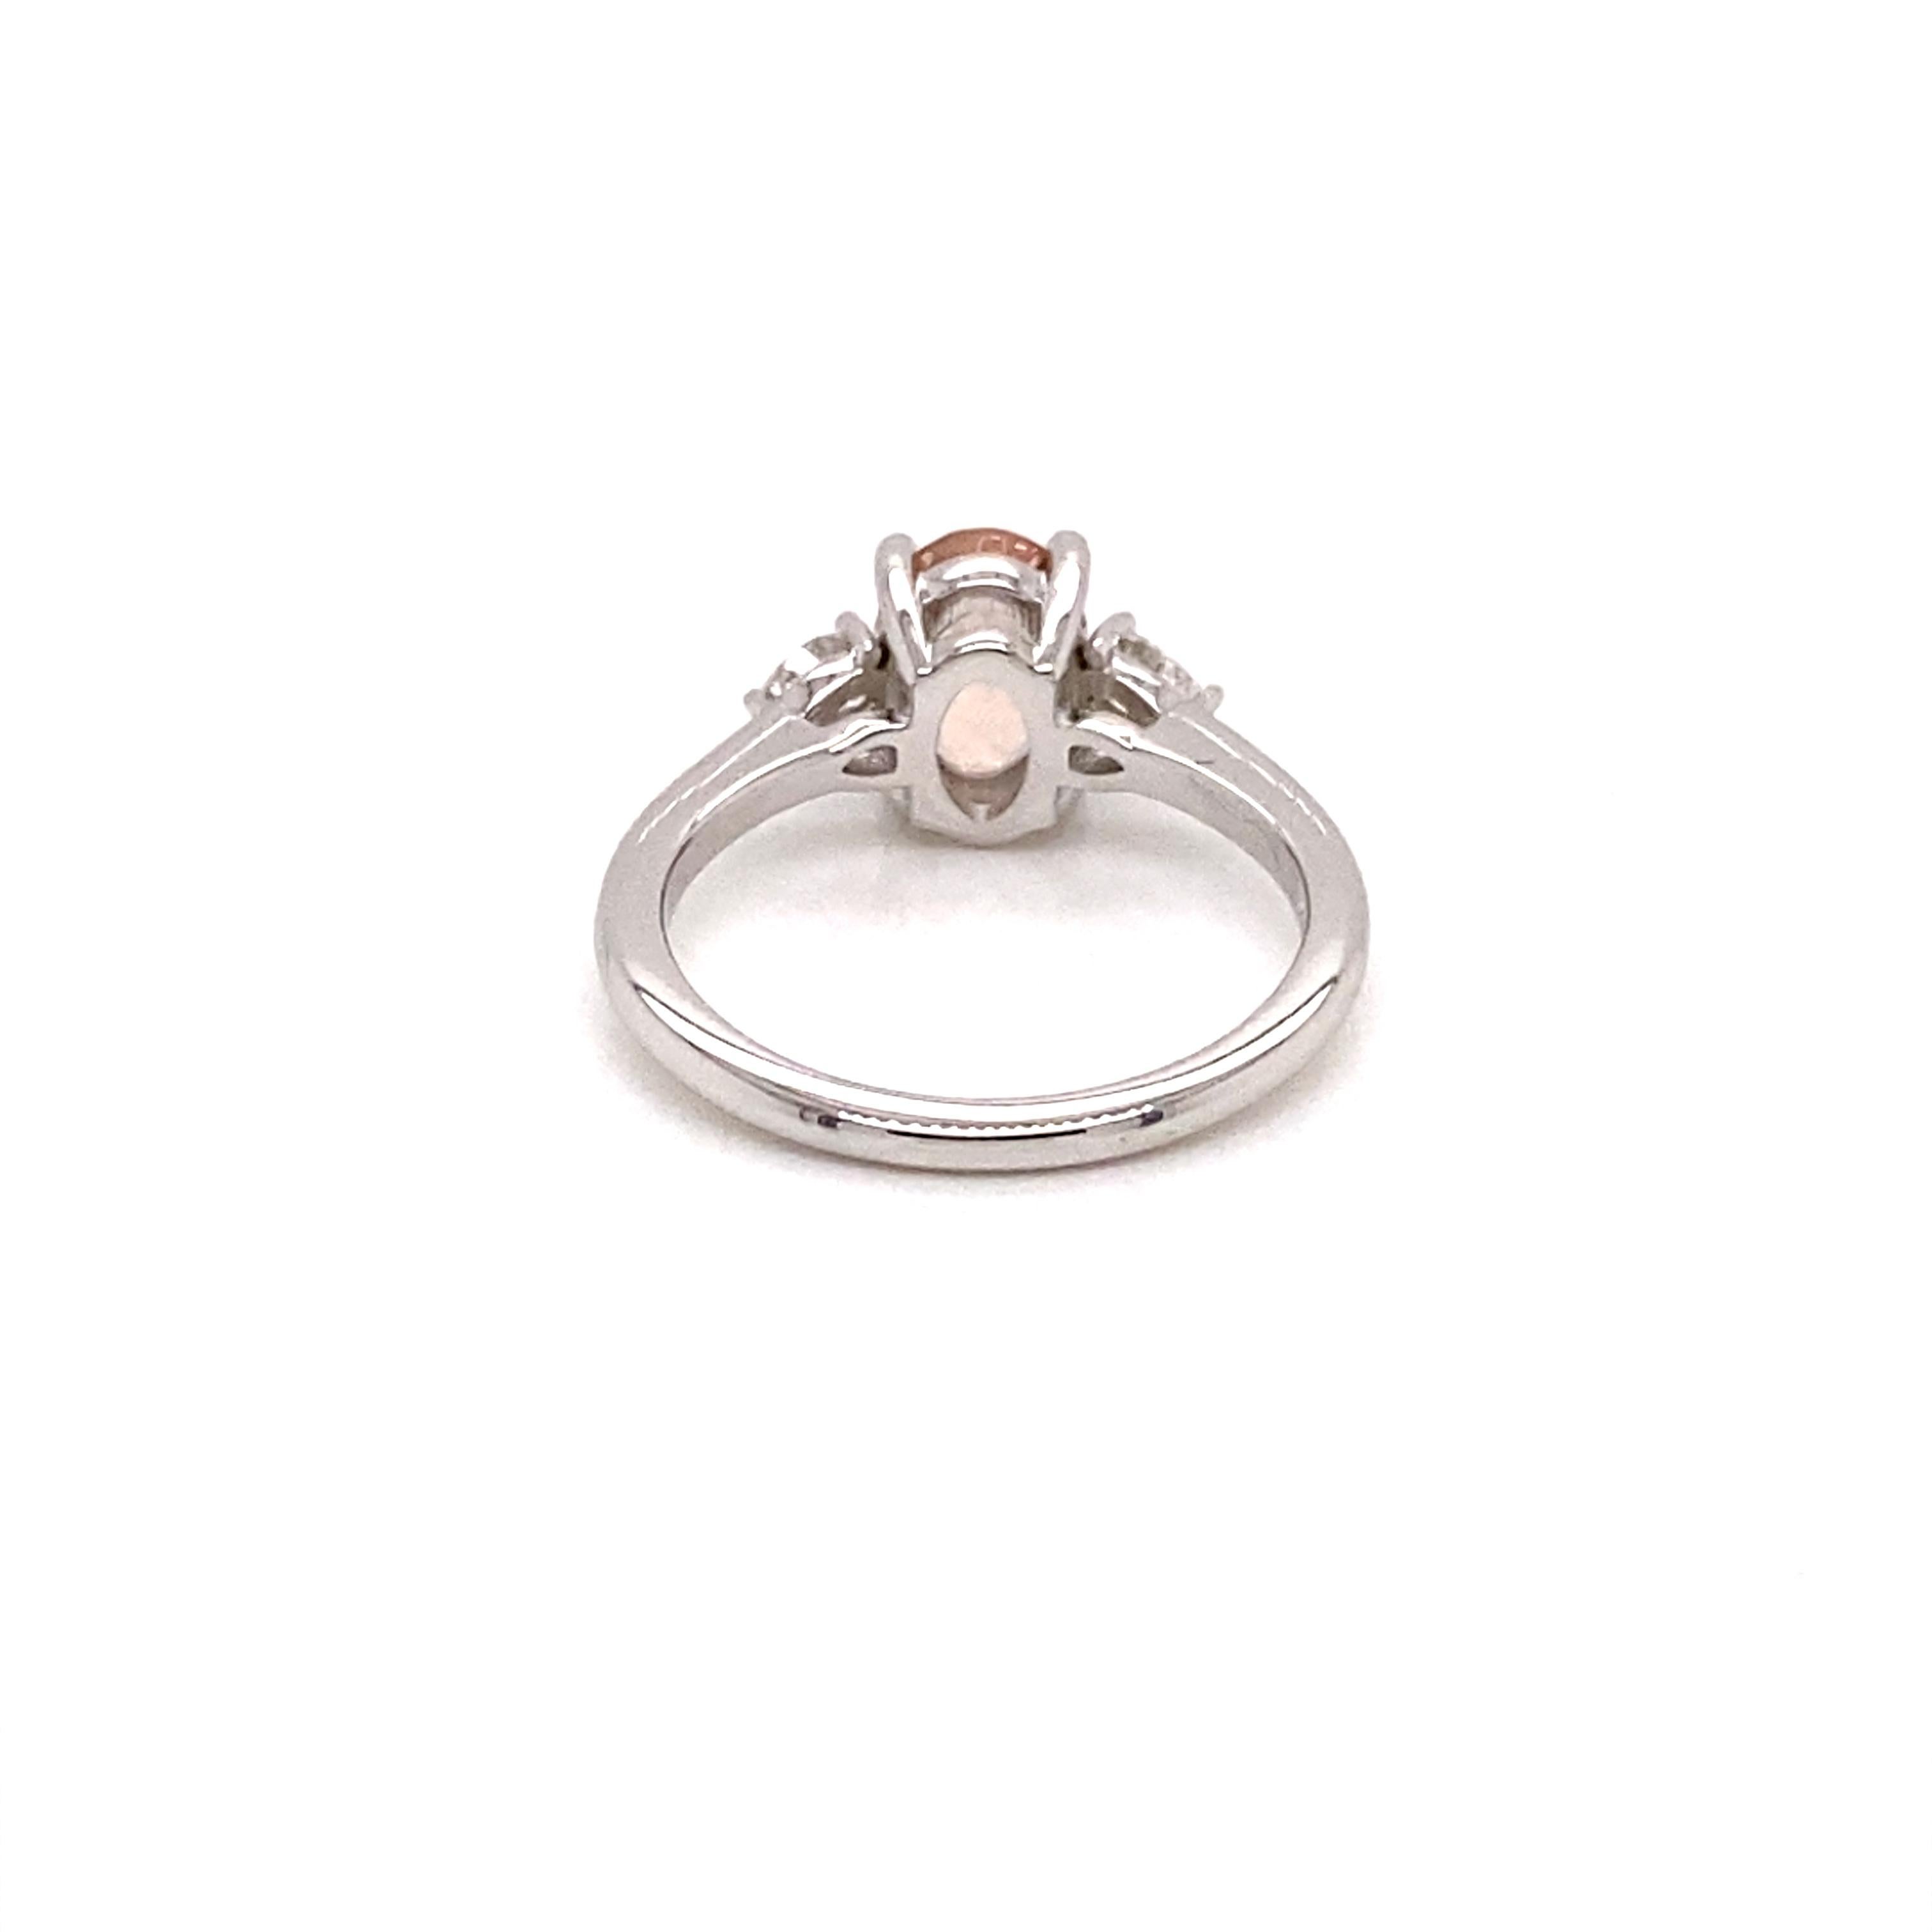 Stunning Eye Catching Peachy Hued Oval Morganite, flanked by scintillating pear-shaped diamonds on each side.
Elegantly set in a polished 14k White gold to complement and contrast the beautiful 1.20 ct Oval Peachy Hued Morganite.
VS F/G Colour